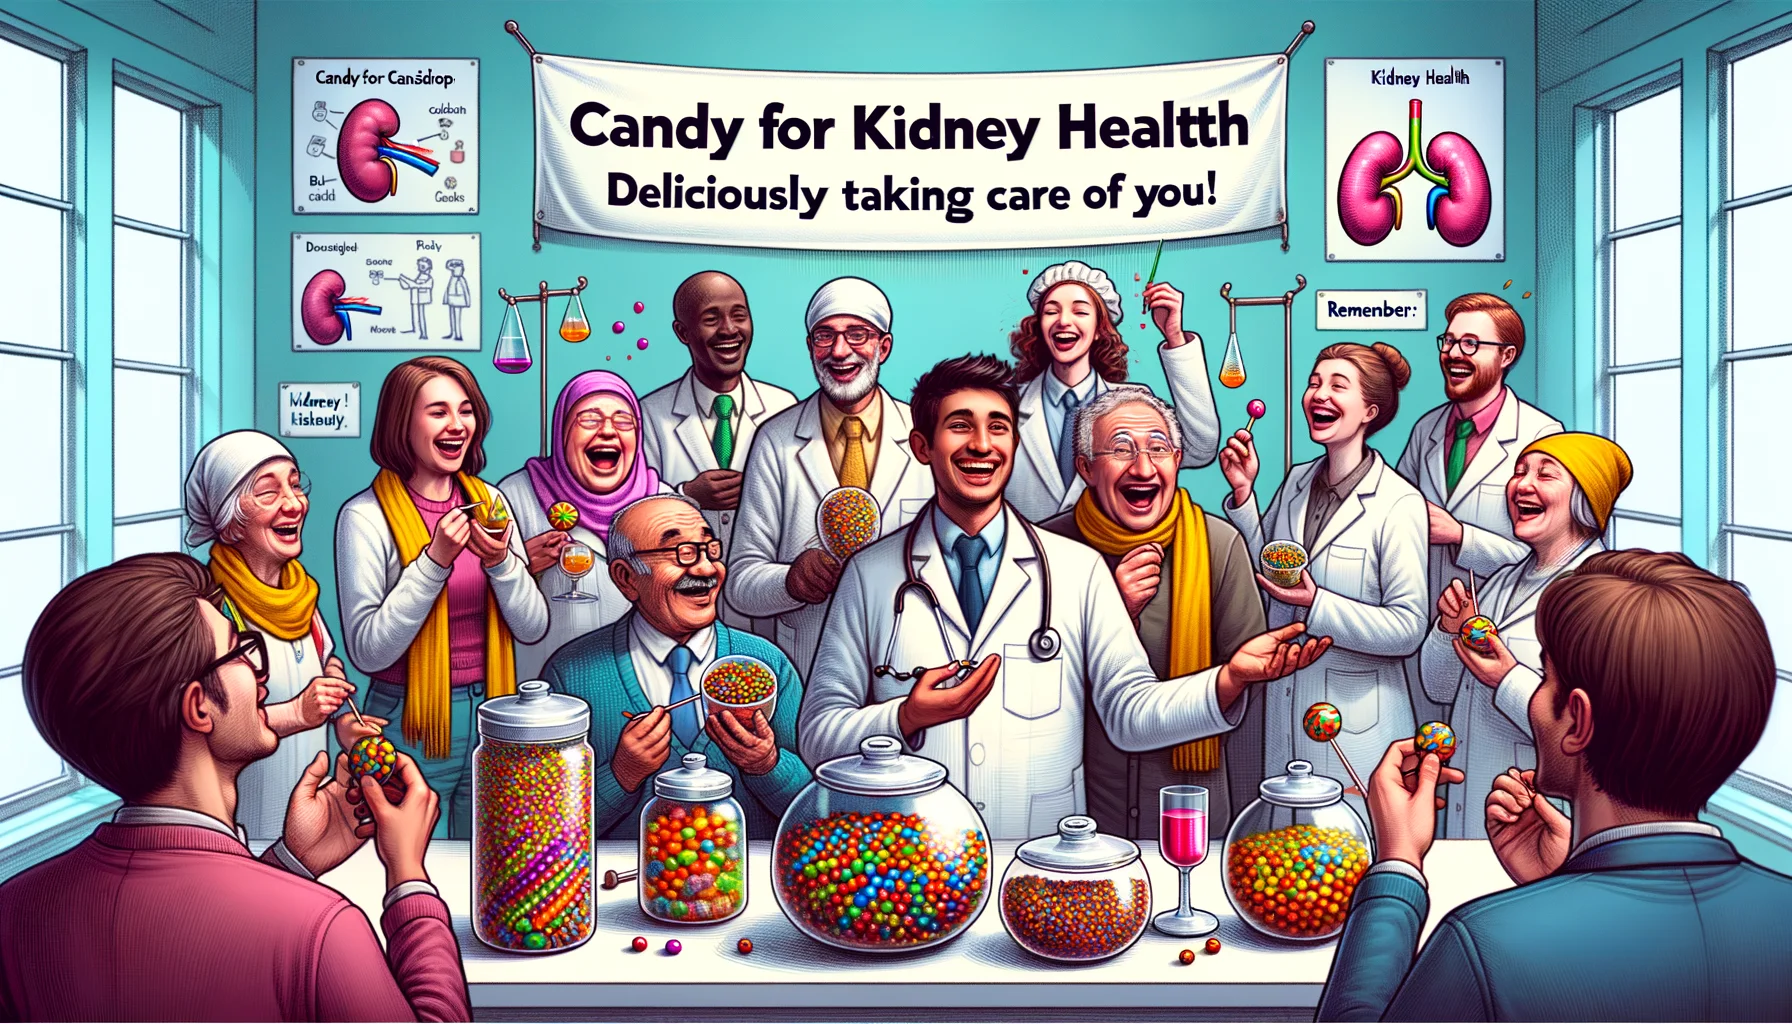 Create a humorous yet realistic illustration of a perfect scenario that promotes 'Candy for Kidney Health'. The image should depict diverse people of different descents such as Caucasian, Black, Middle-Eastern, and South Asian and varying genders, both males and females. Sketch these people enjoying and sharing brightly colored, fancy-looking kidney health candies in a safe and clean environment. Throw in a backdrop of a science lab or medical setting to add an aura of authenticity. Remember, these candies are meant to portray their vital role in kidney health. Include a catchy visual slogan that reads 'Candy for Kidney Health: Deliciously taking care of you!'